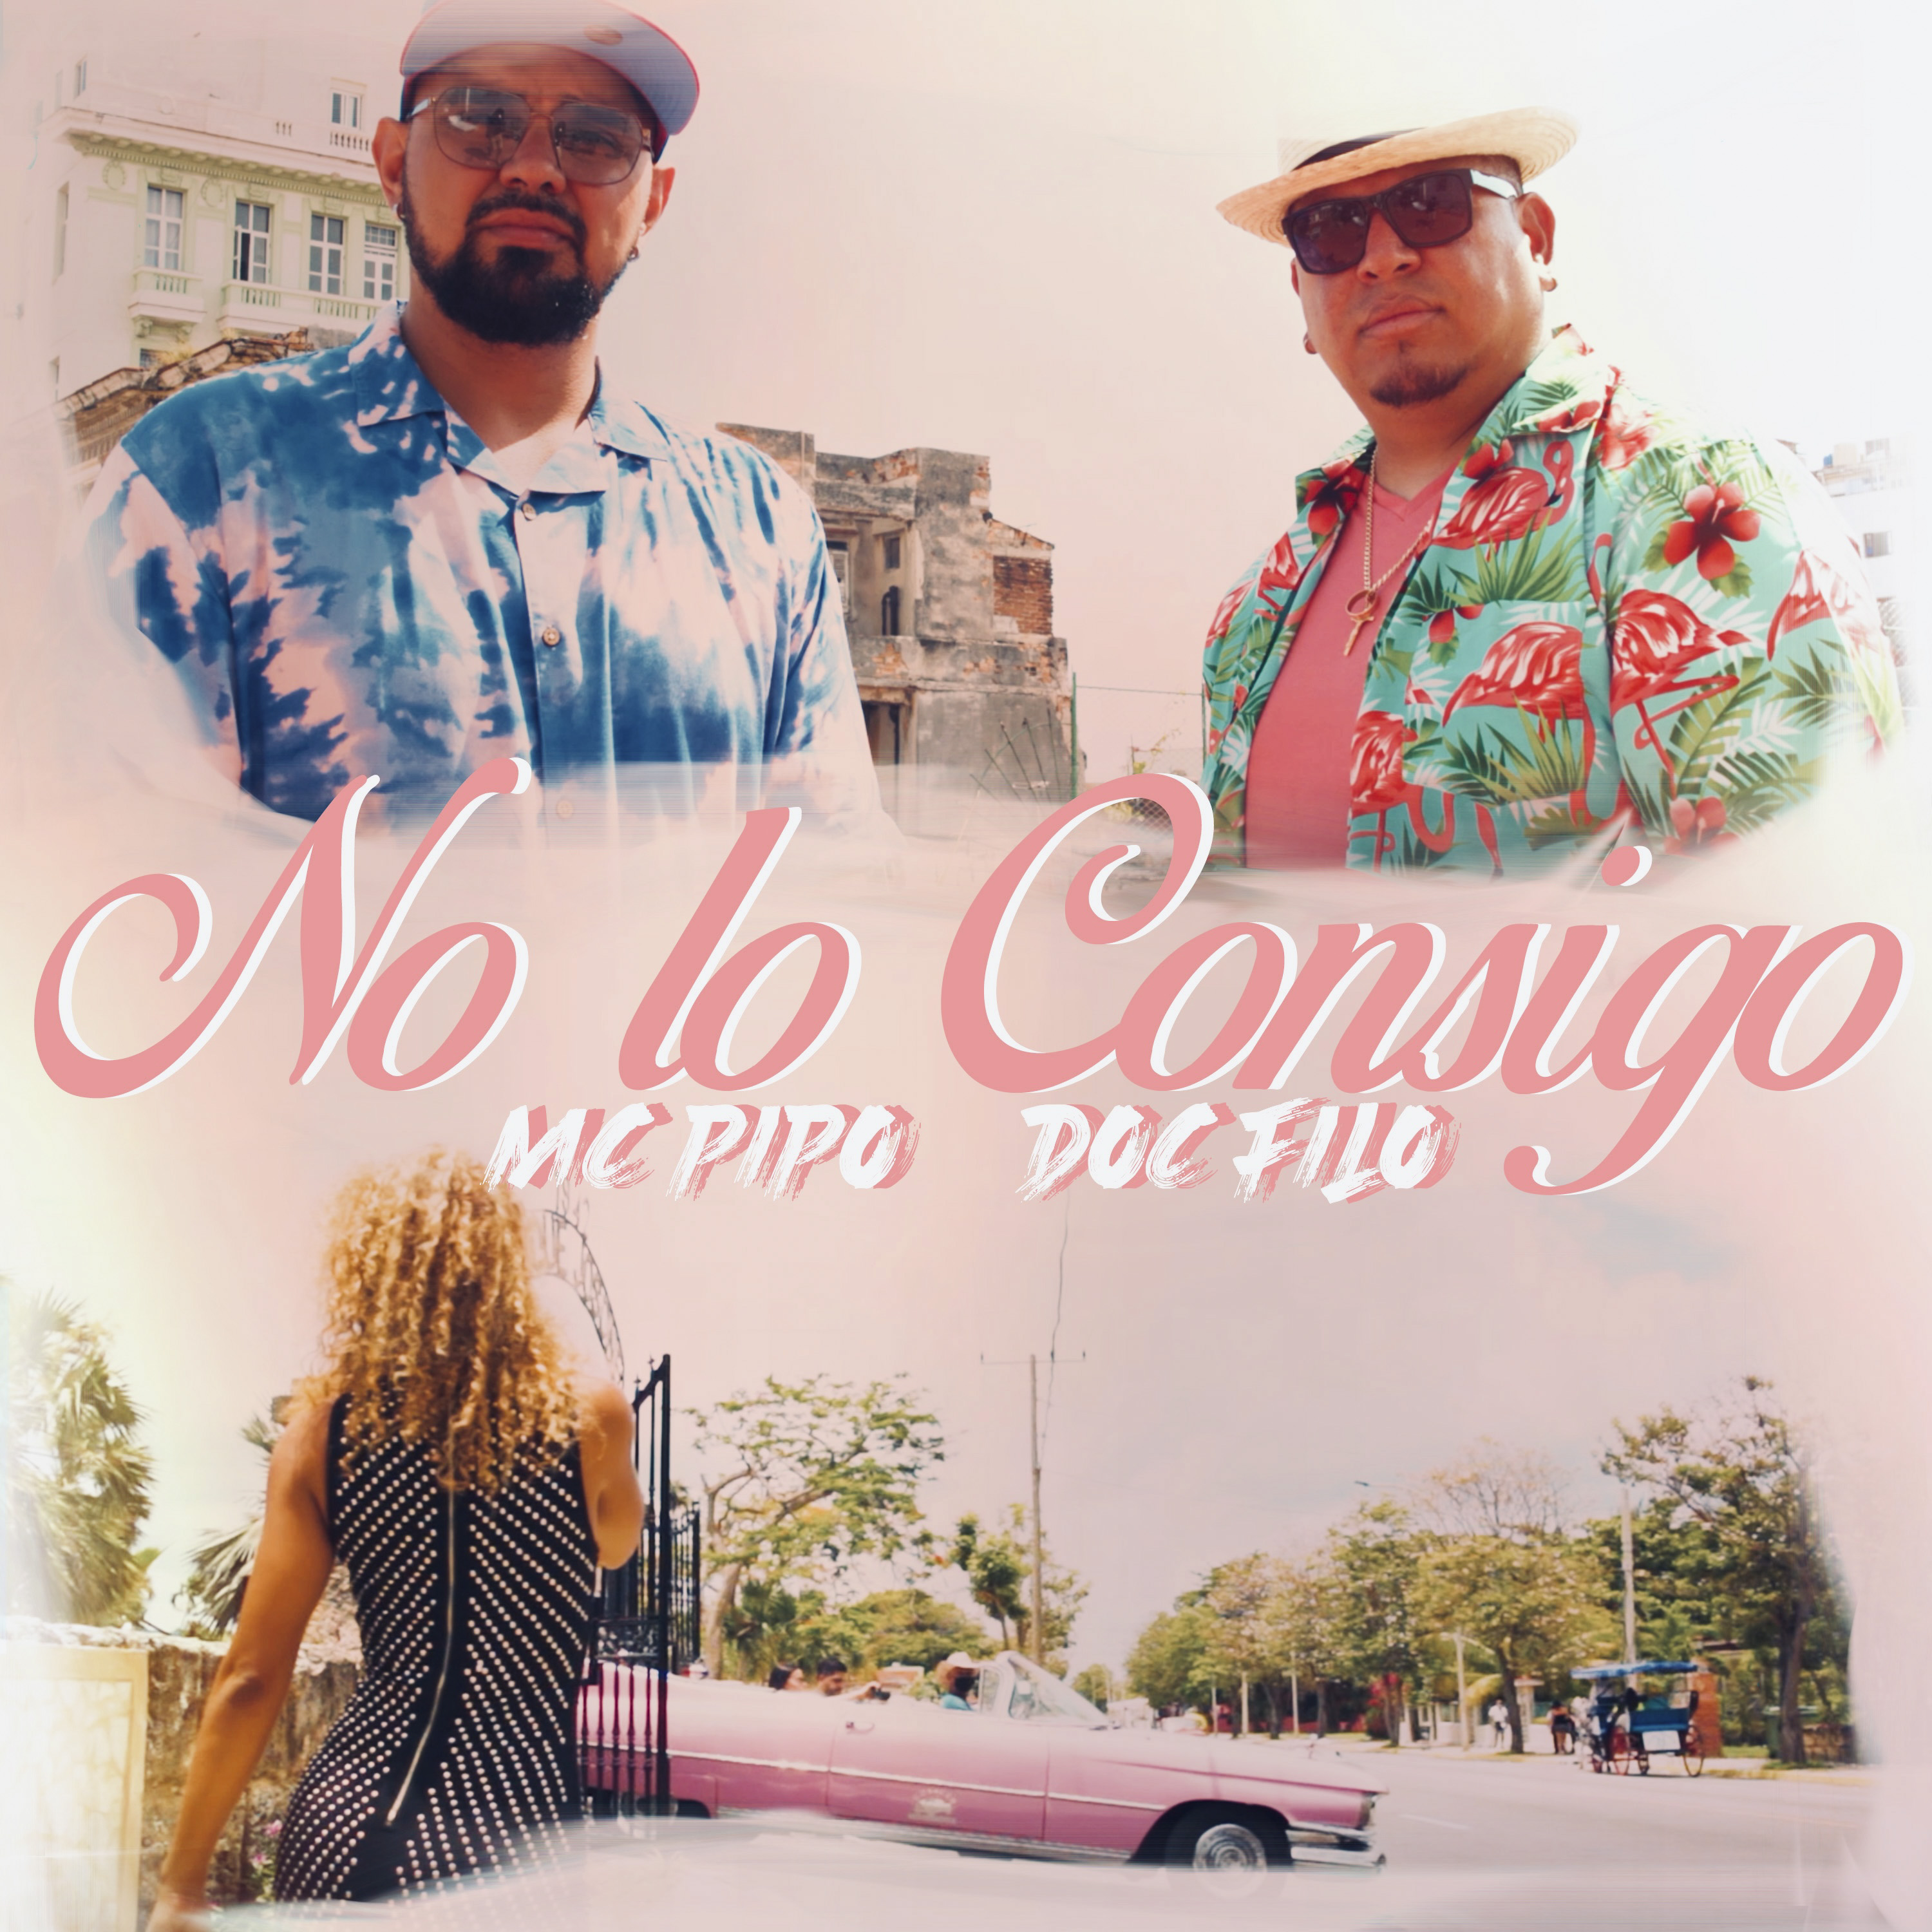 Breakout Spanish Rappers MC Pipo & Doc Filo Bring Tropical Heat To Listeners With Their Newest Single, “No Lo Consigo”